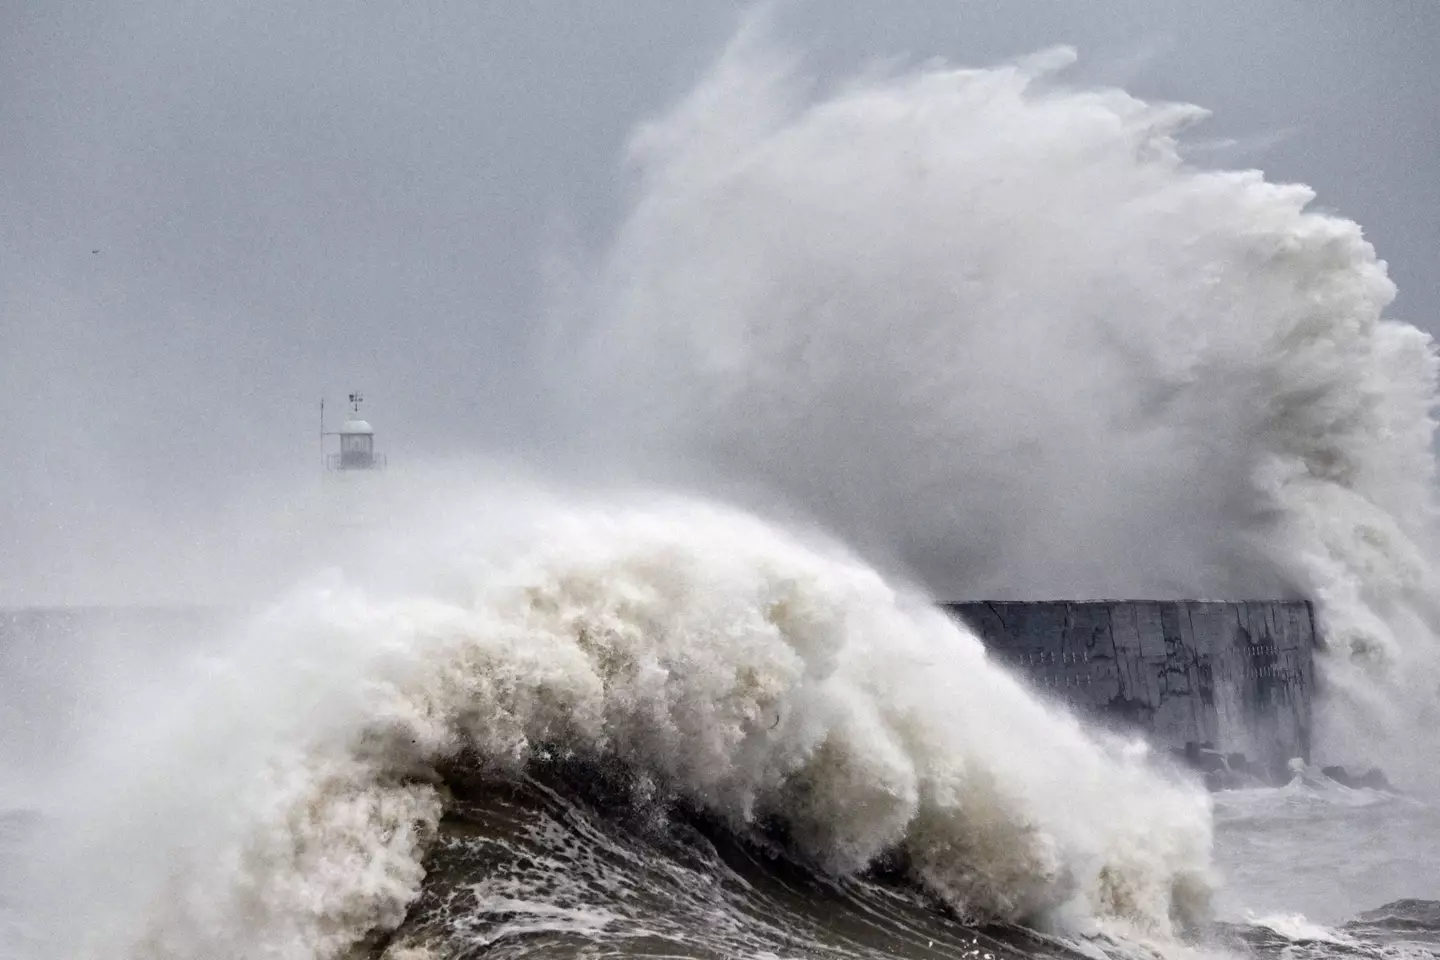 Brits have been urged not to travel over the weekend due to Storm Ciaran.